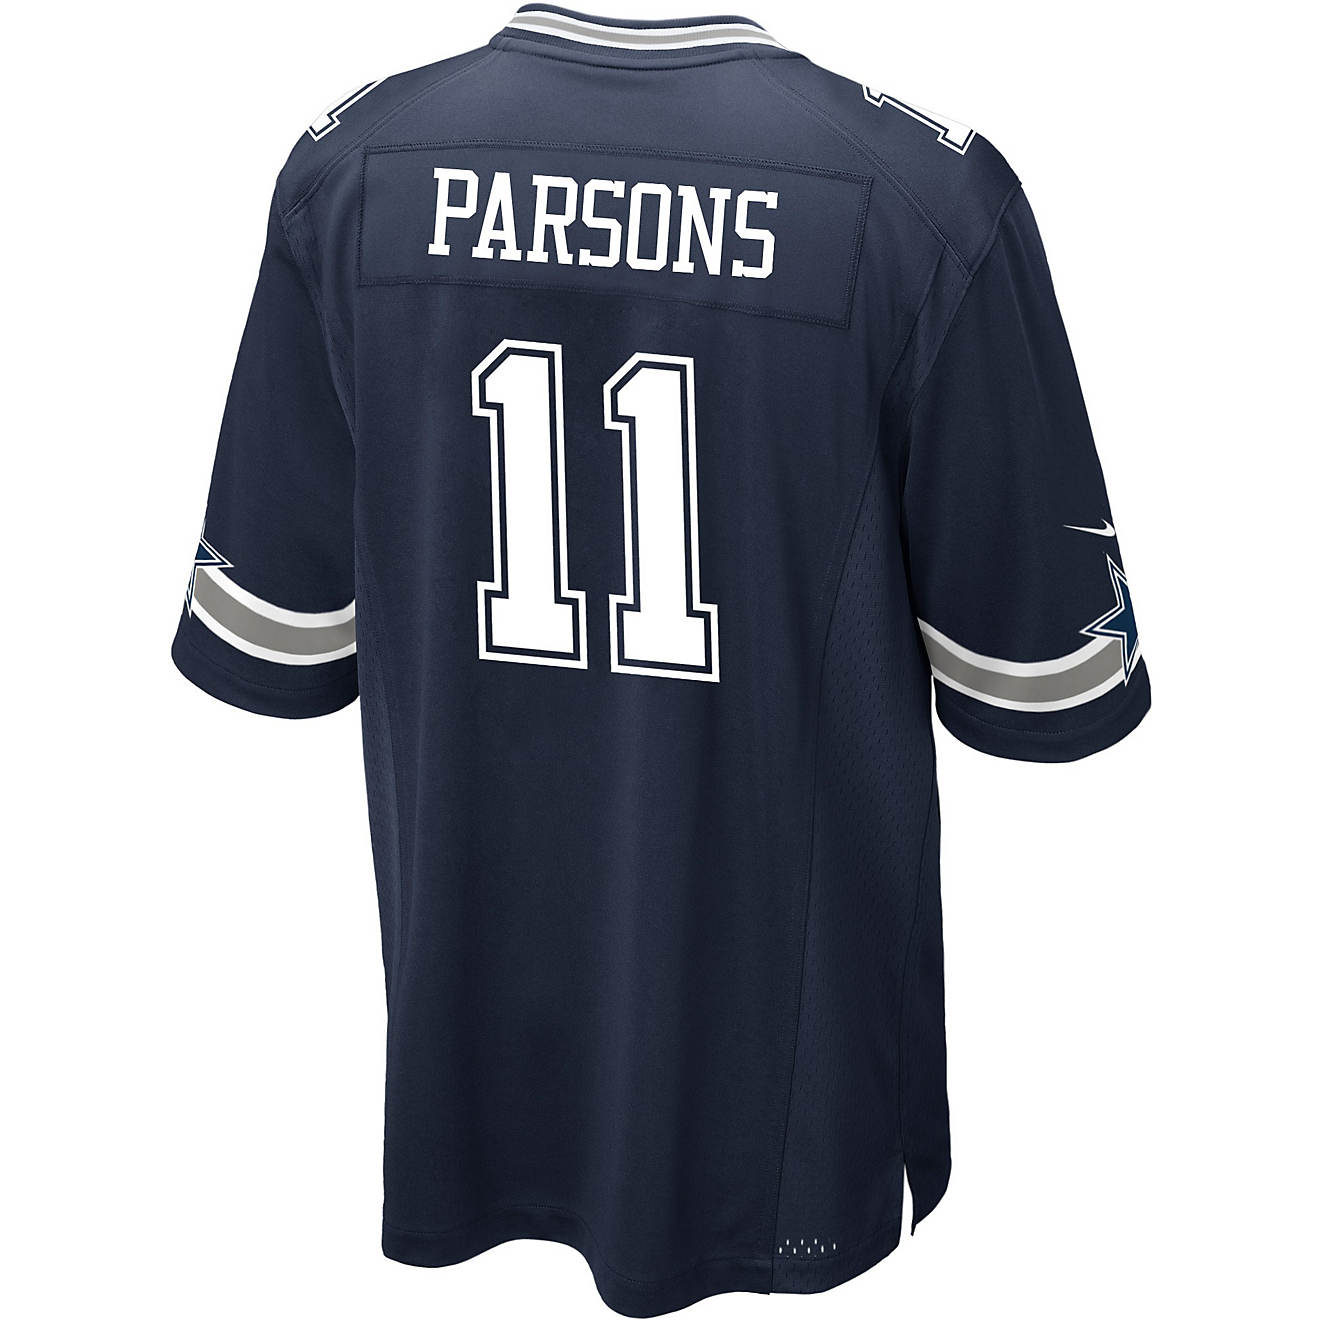 parsons jersey mens